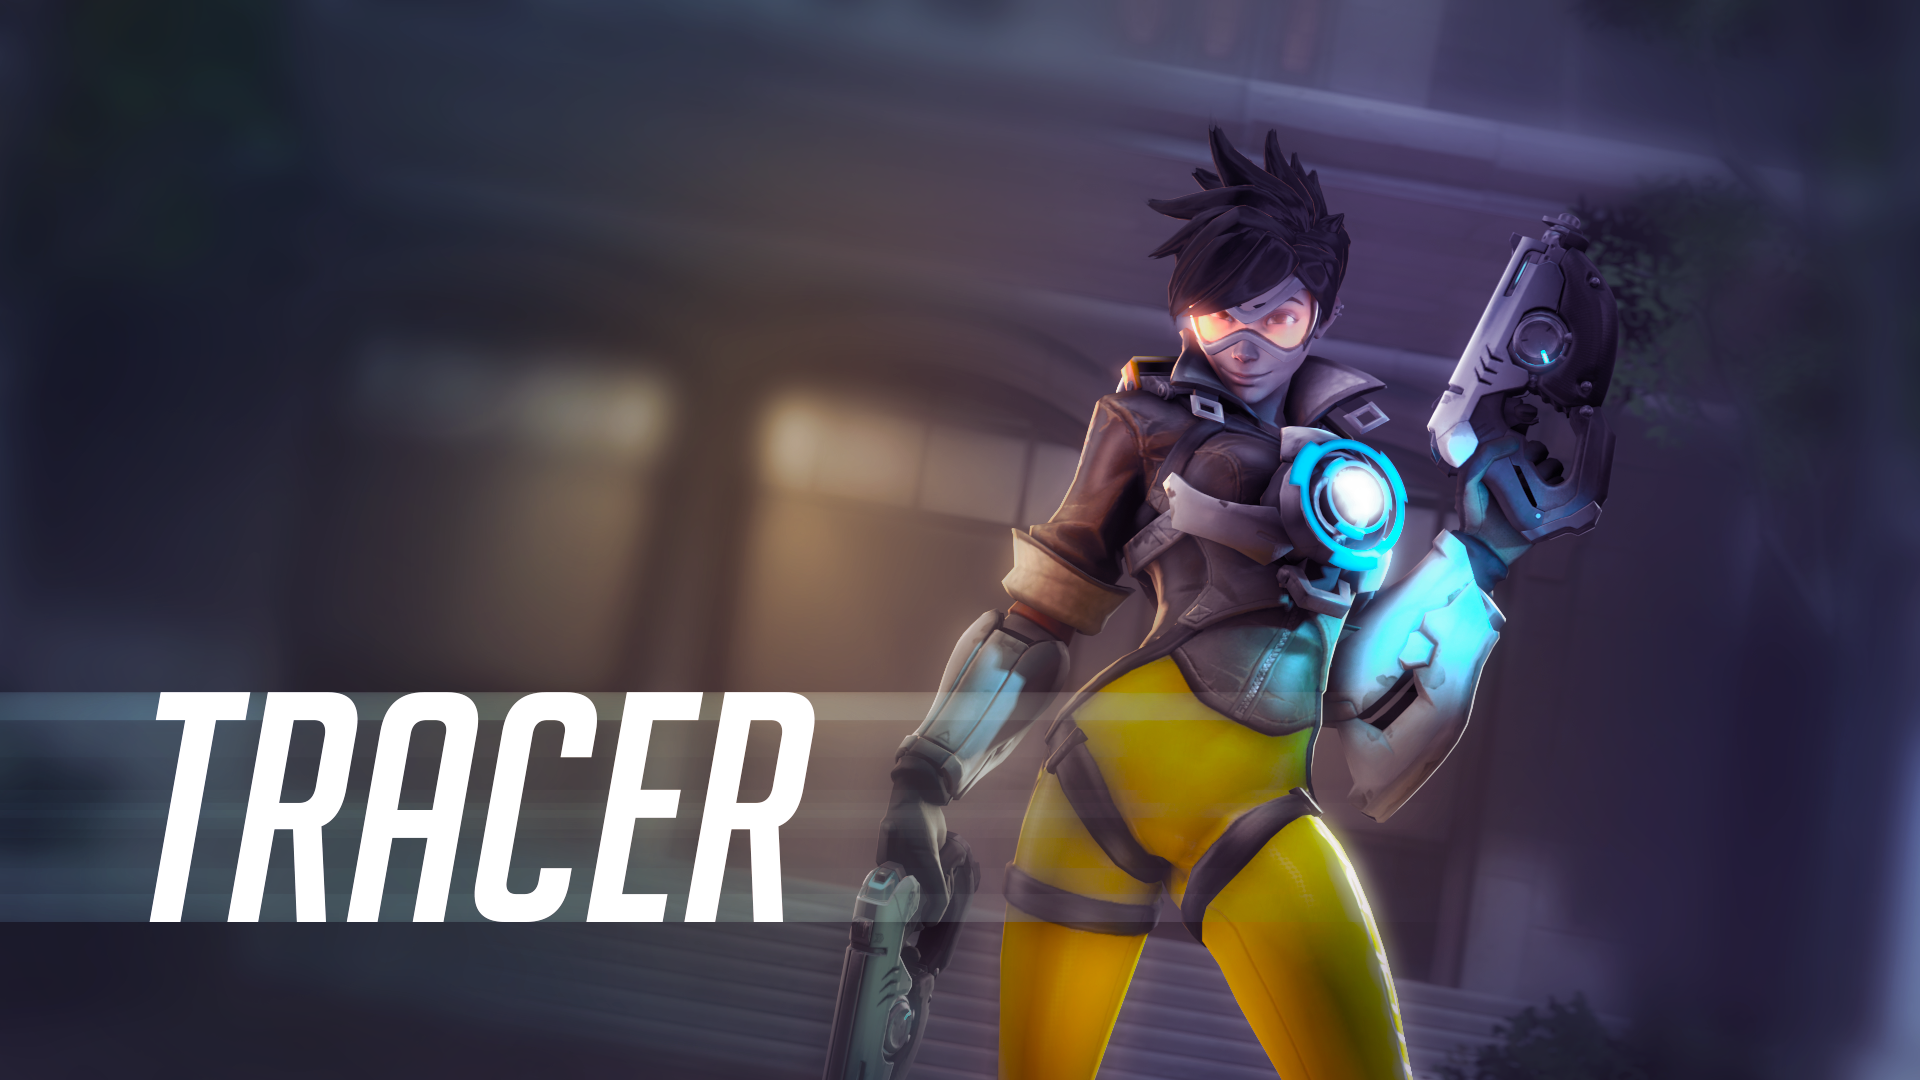 Overwatch Blizzard Entertainment Video Games Ferexes Tracer Overwatch Lena Oxton 1920x1080